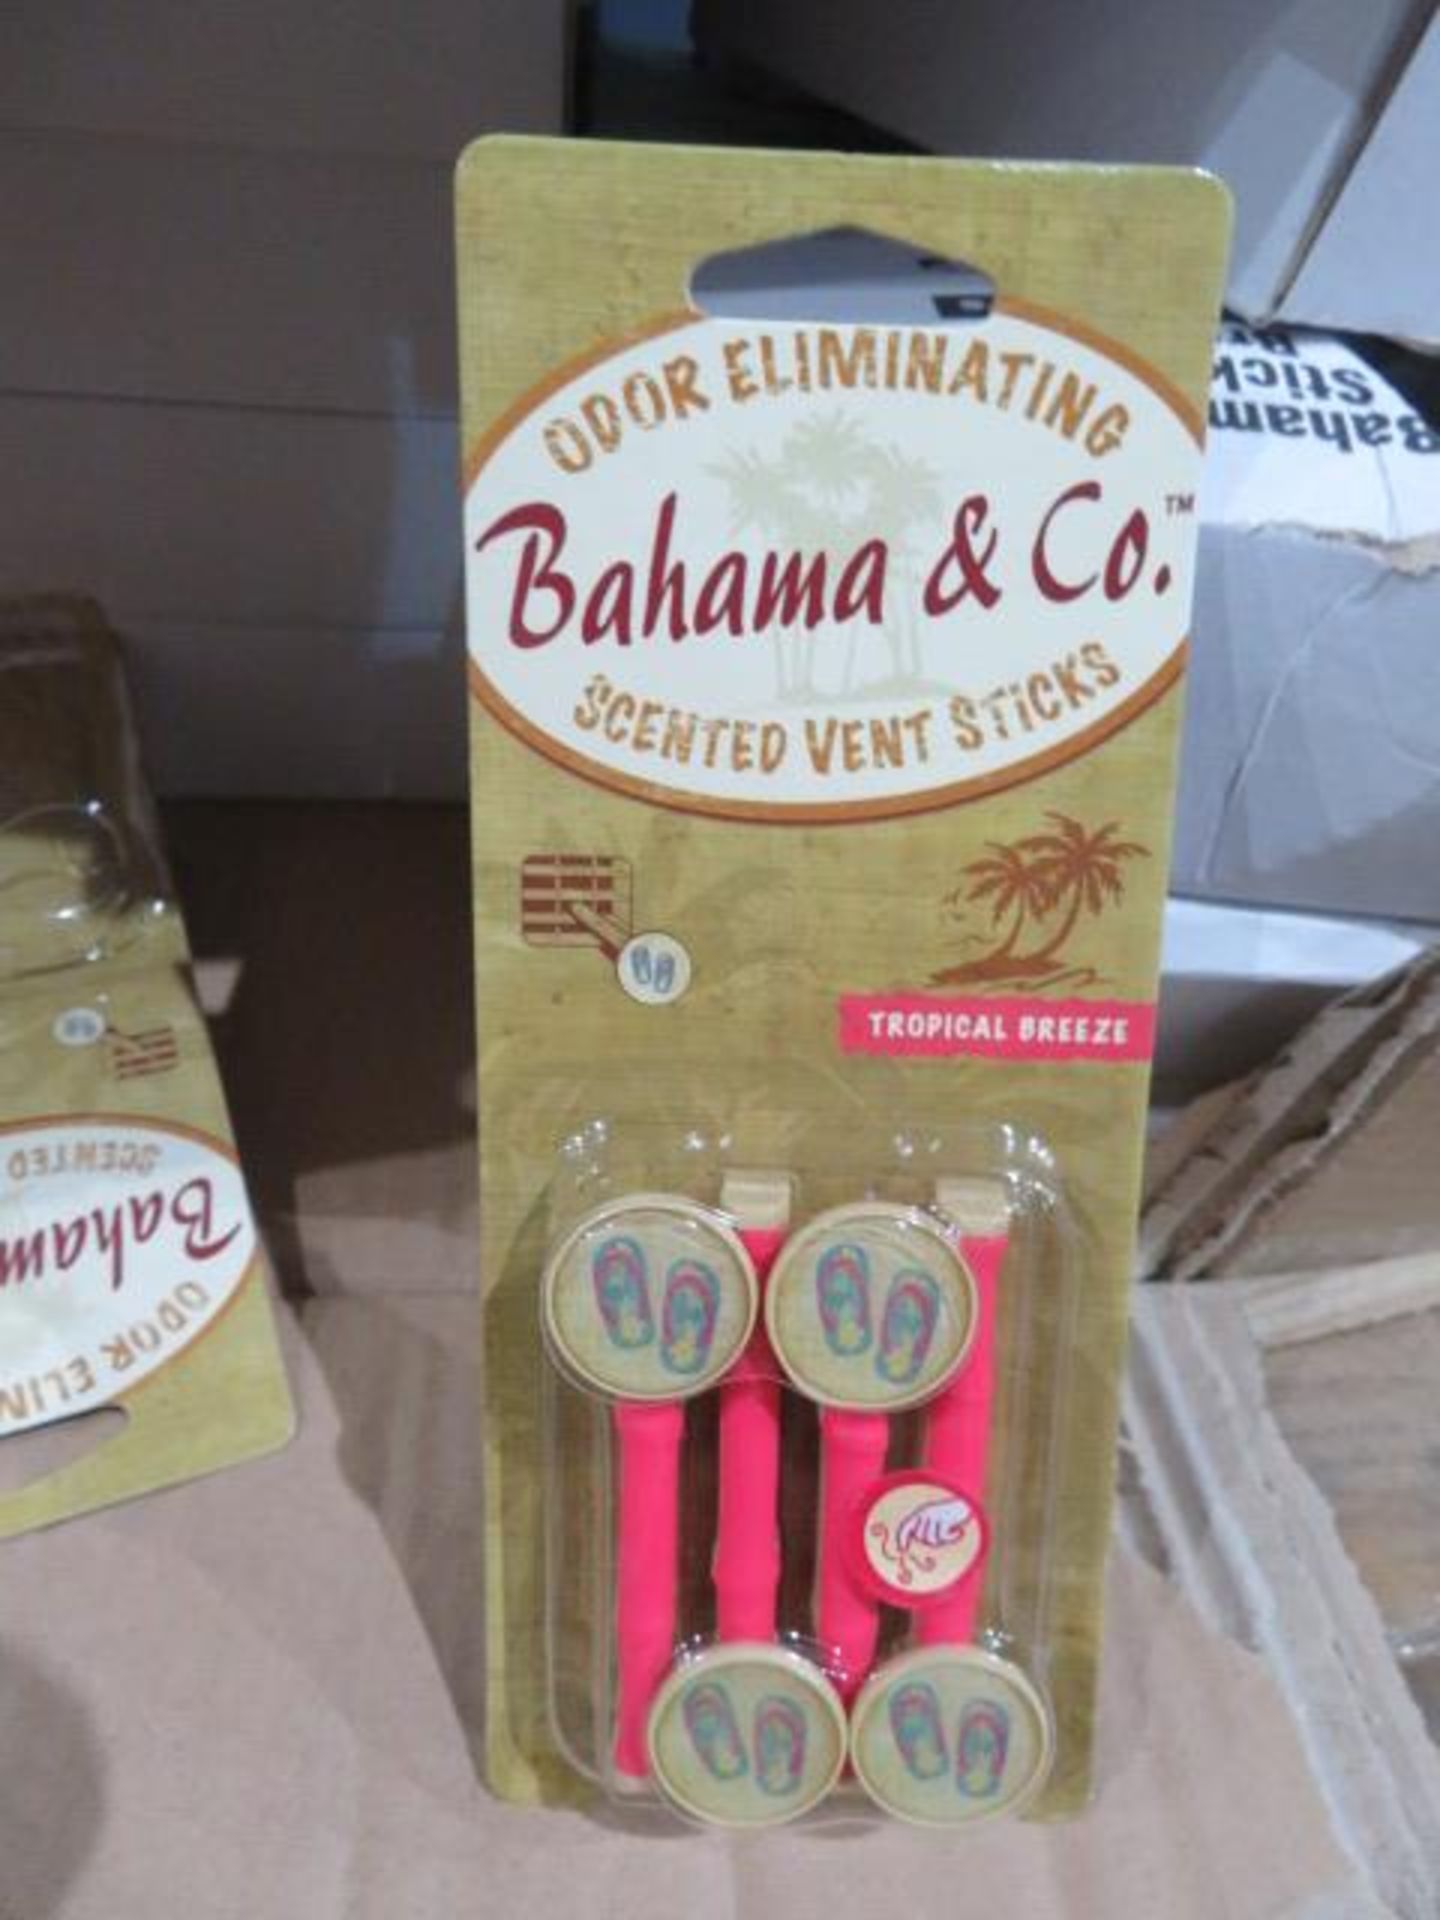 288 PACKS OF BAHAMA & CO SCENTED VENT STICK AIR FRESHNERS FOR CARS